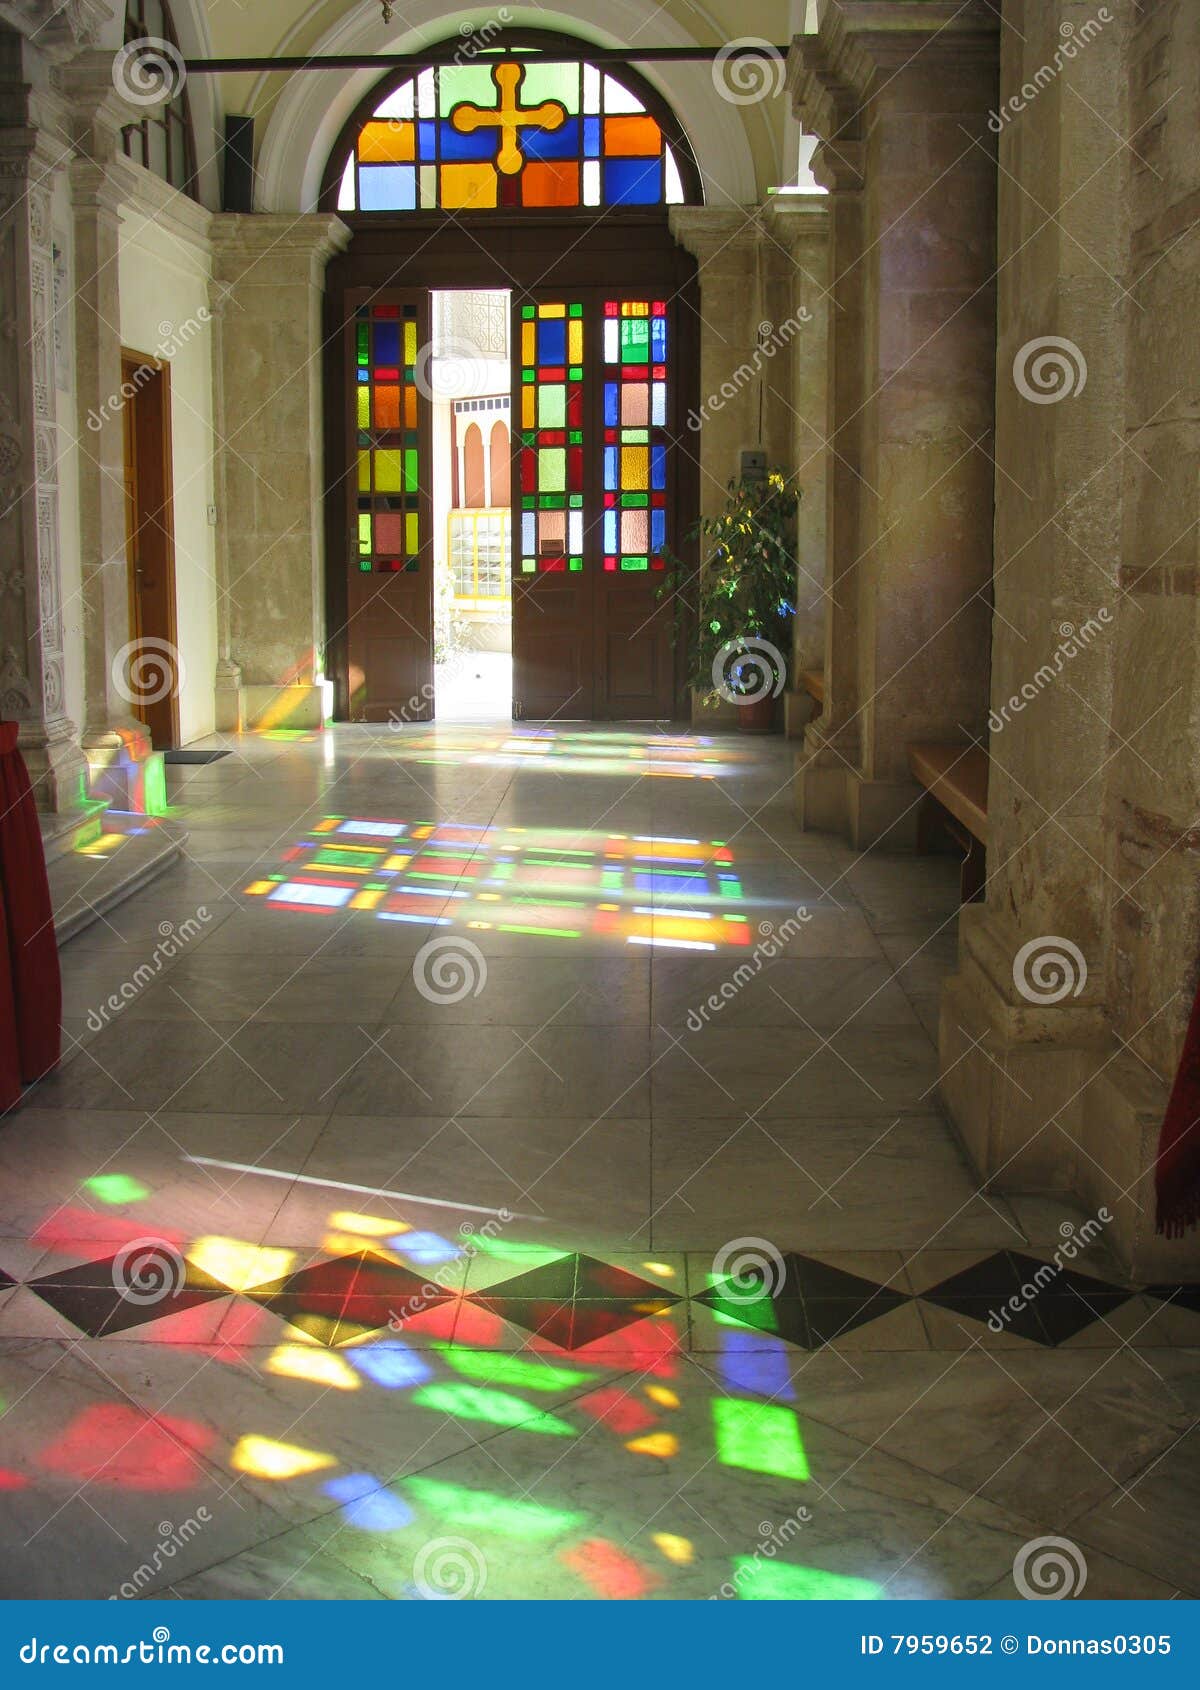 reflections of stained glass windows